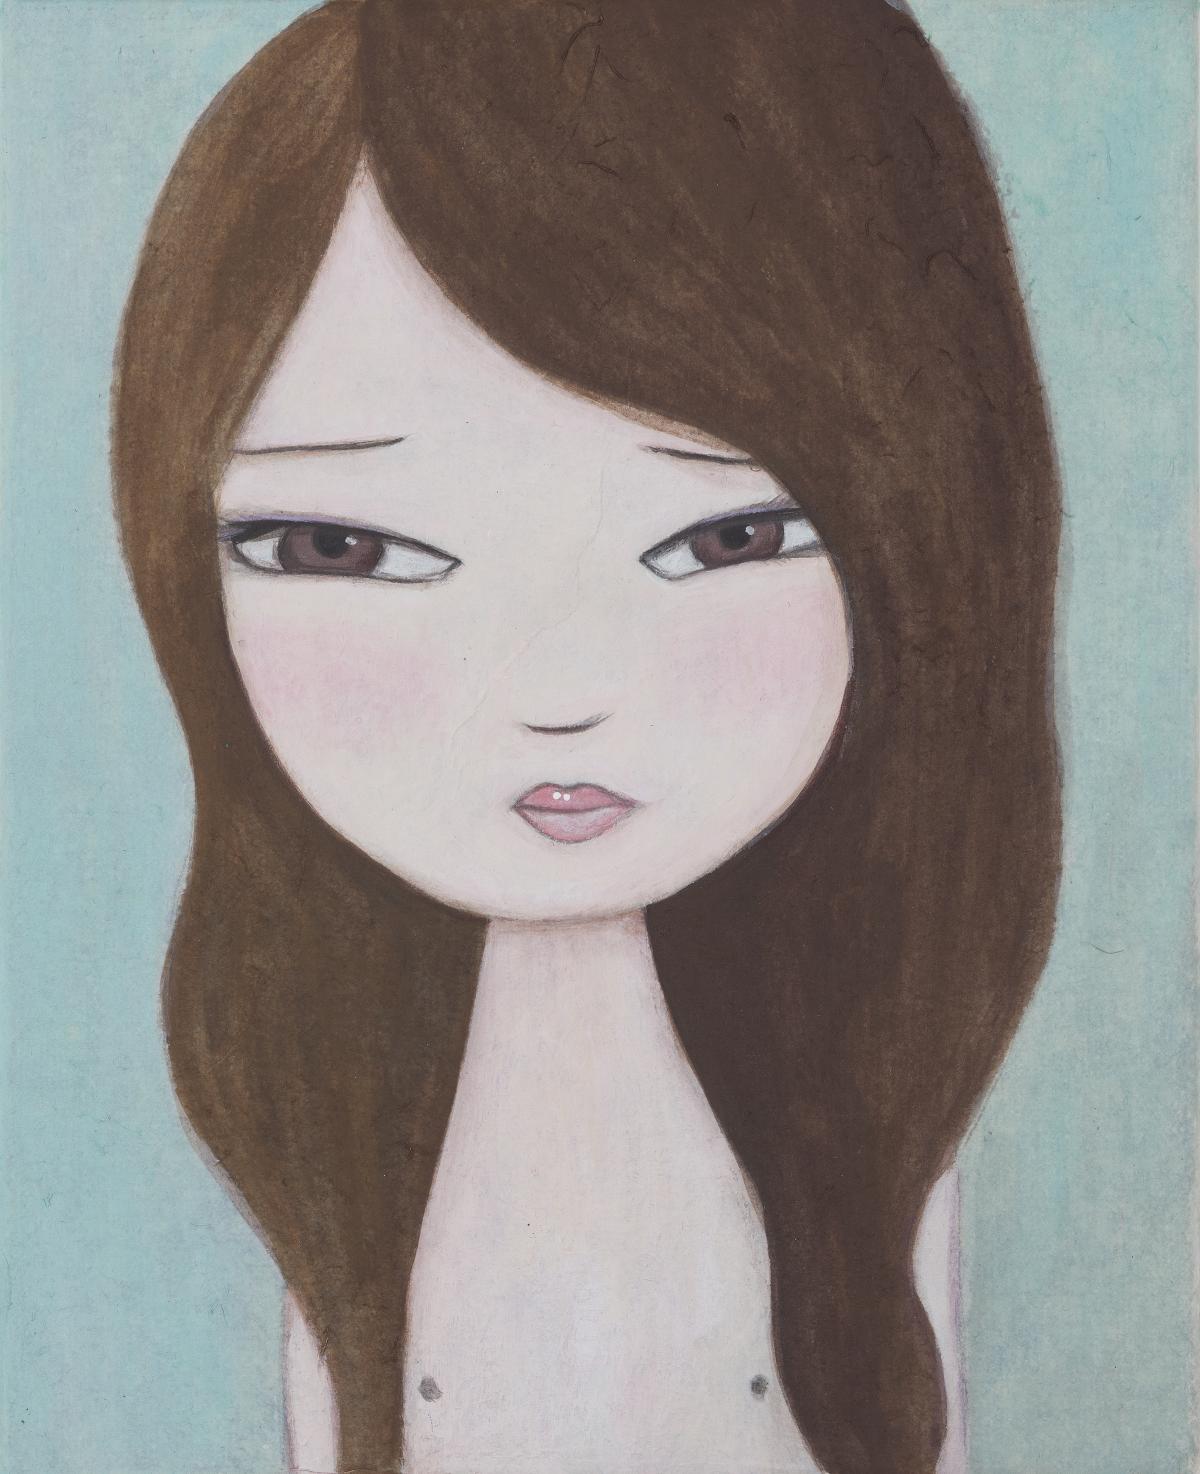 Artwork by Kyung Jeon titled Waterlilies Girl Portrait, 2012